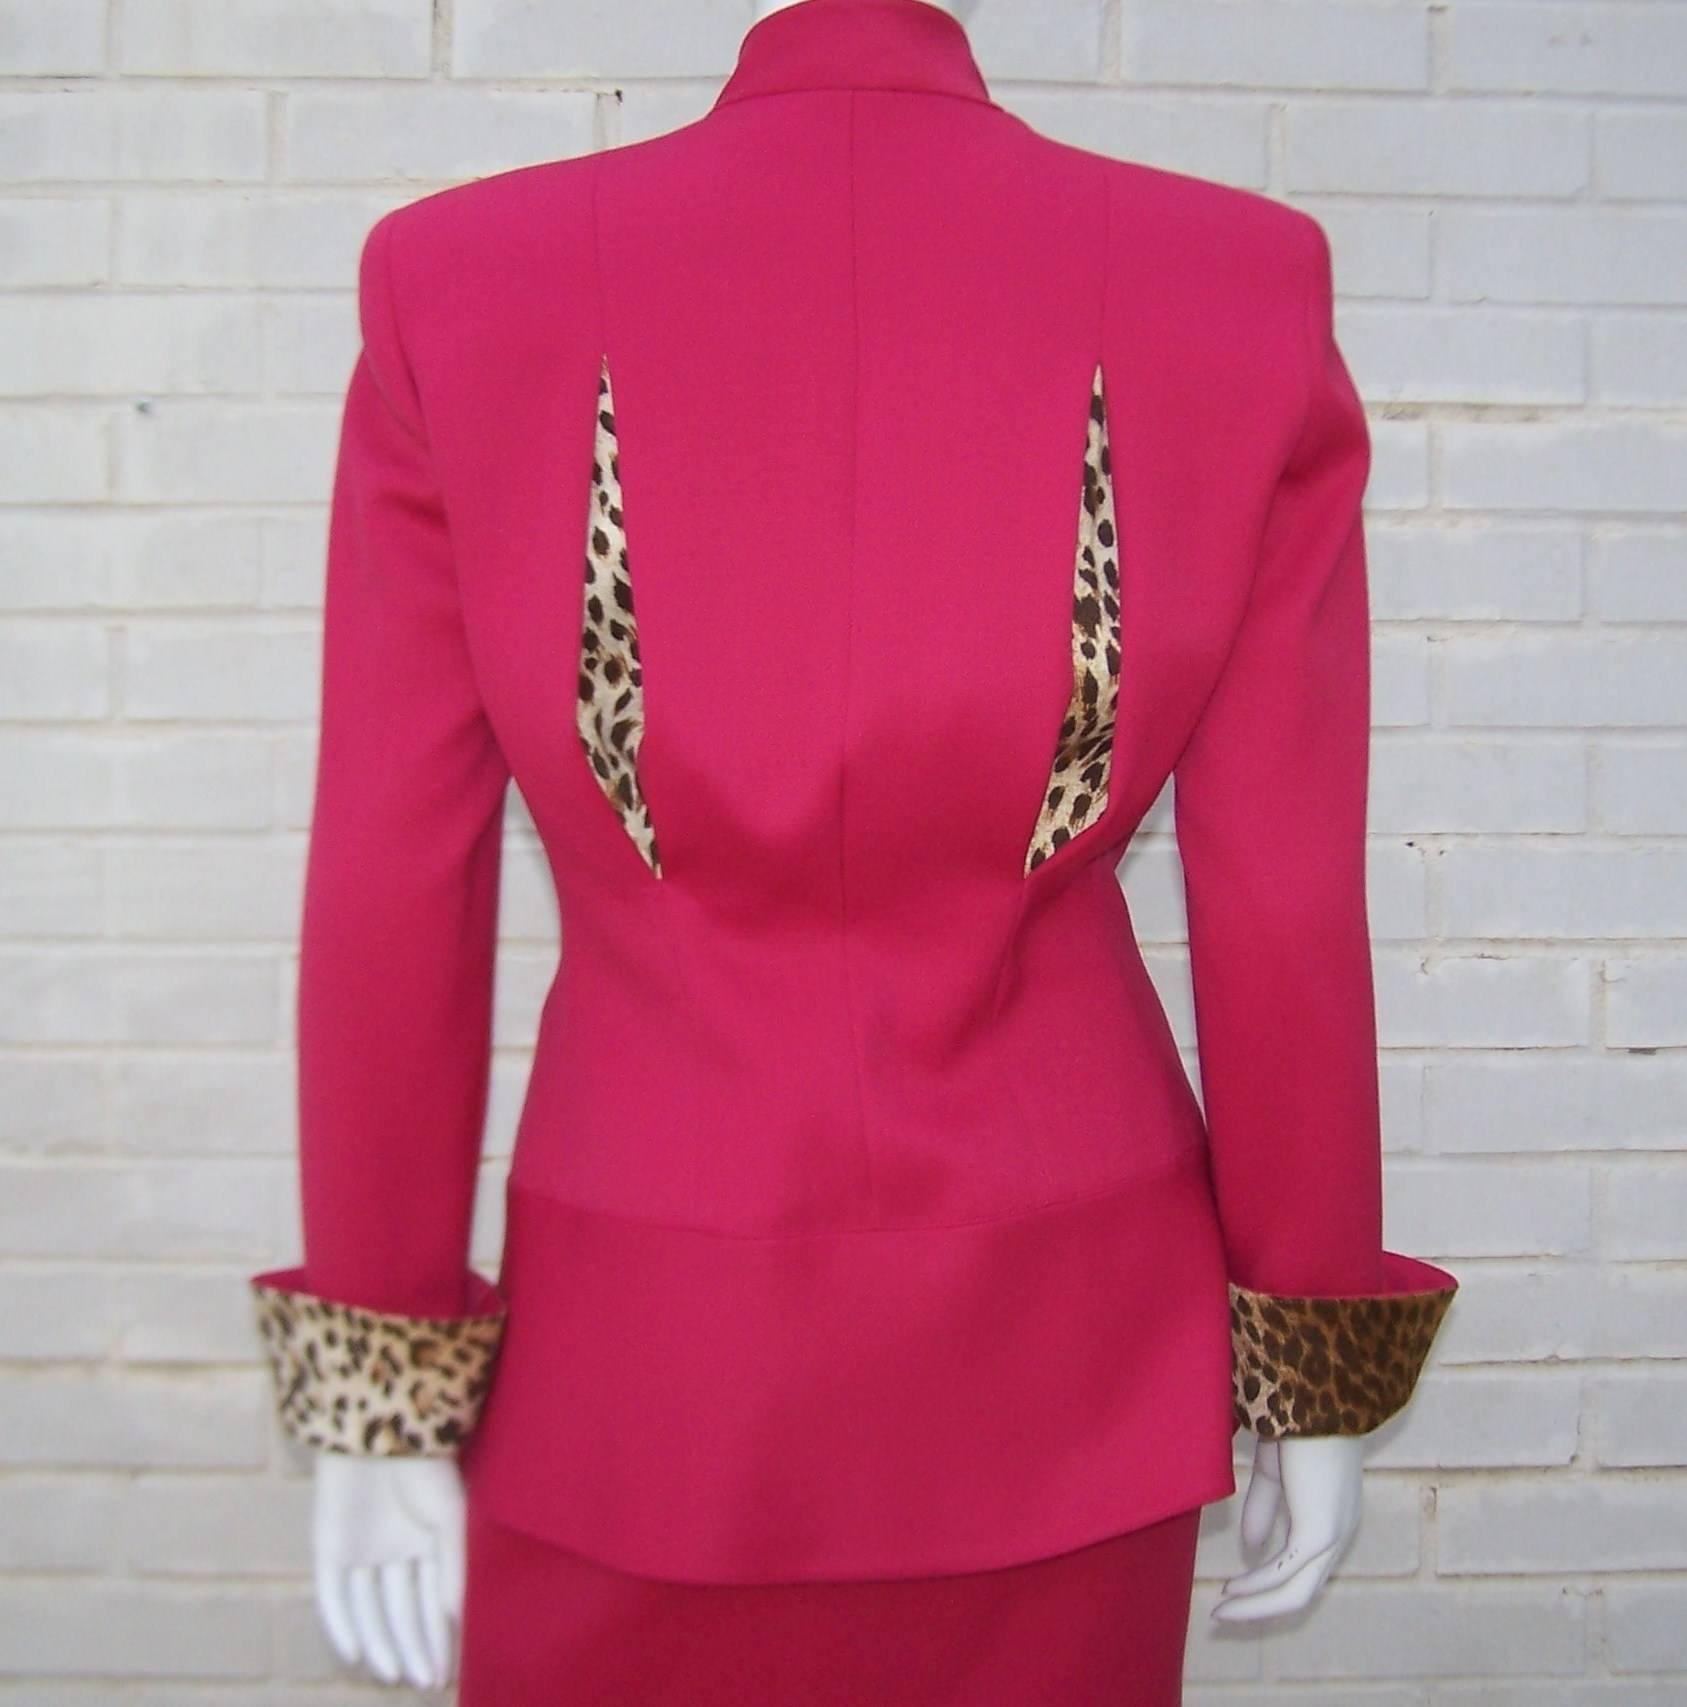 C.1990 Raspberry Red Valentino Dress Suit With Cheetah Print Vents & Cuffs 5